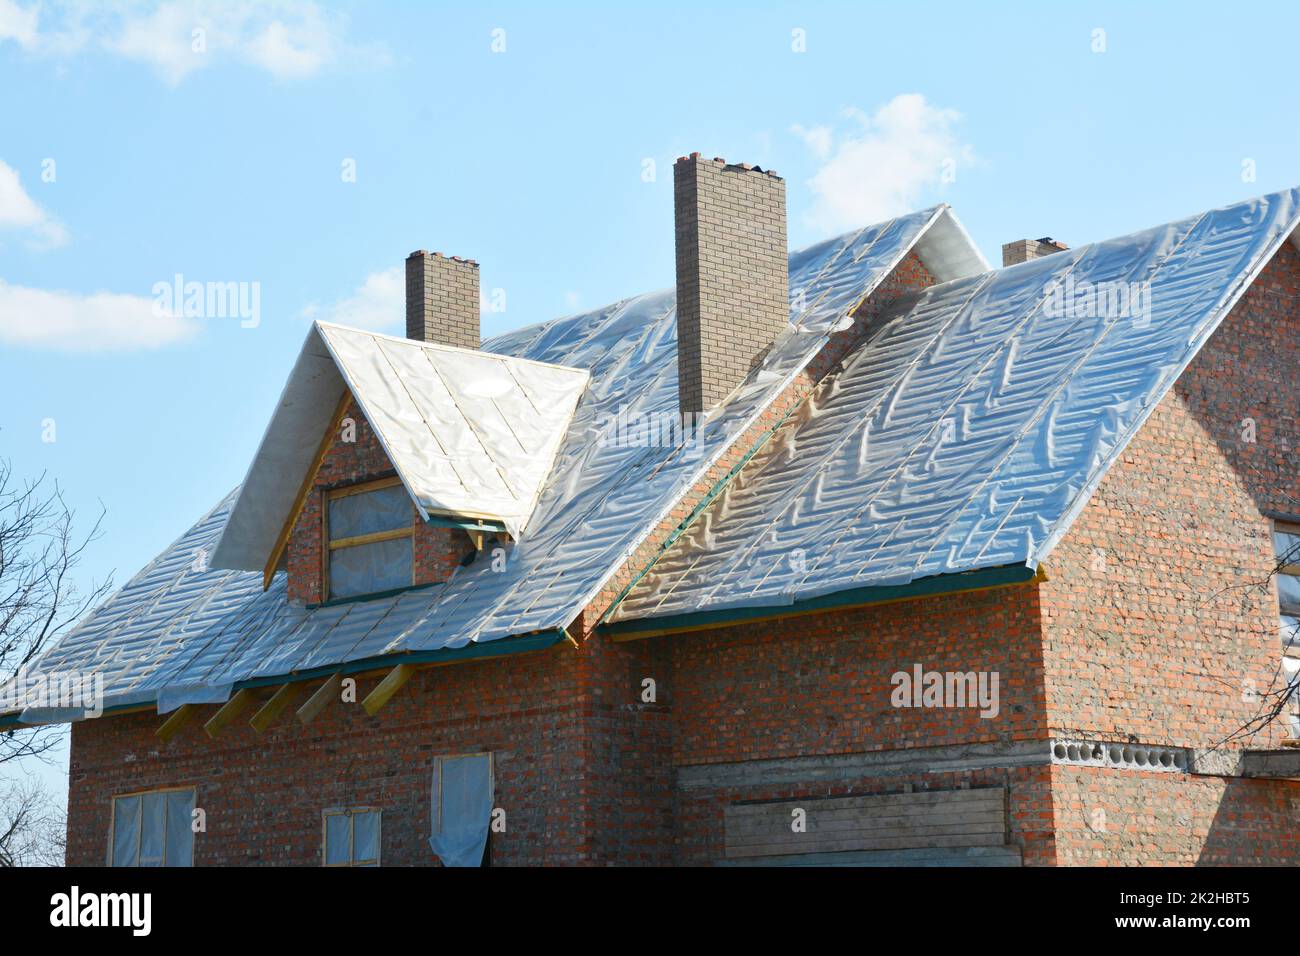 Roofing material Waterproof for thermal-insulation and waterproofing, warm roof construction and roof waterproofing membrane. Stock Photo